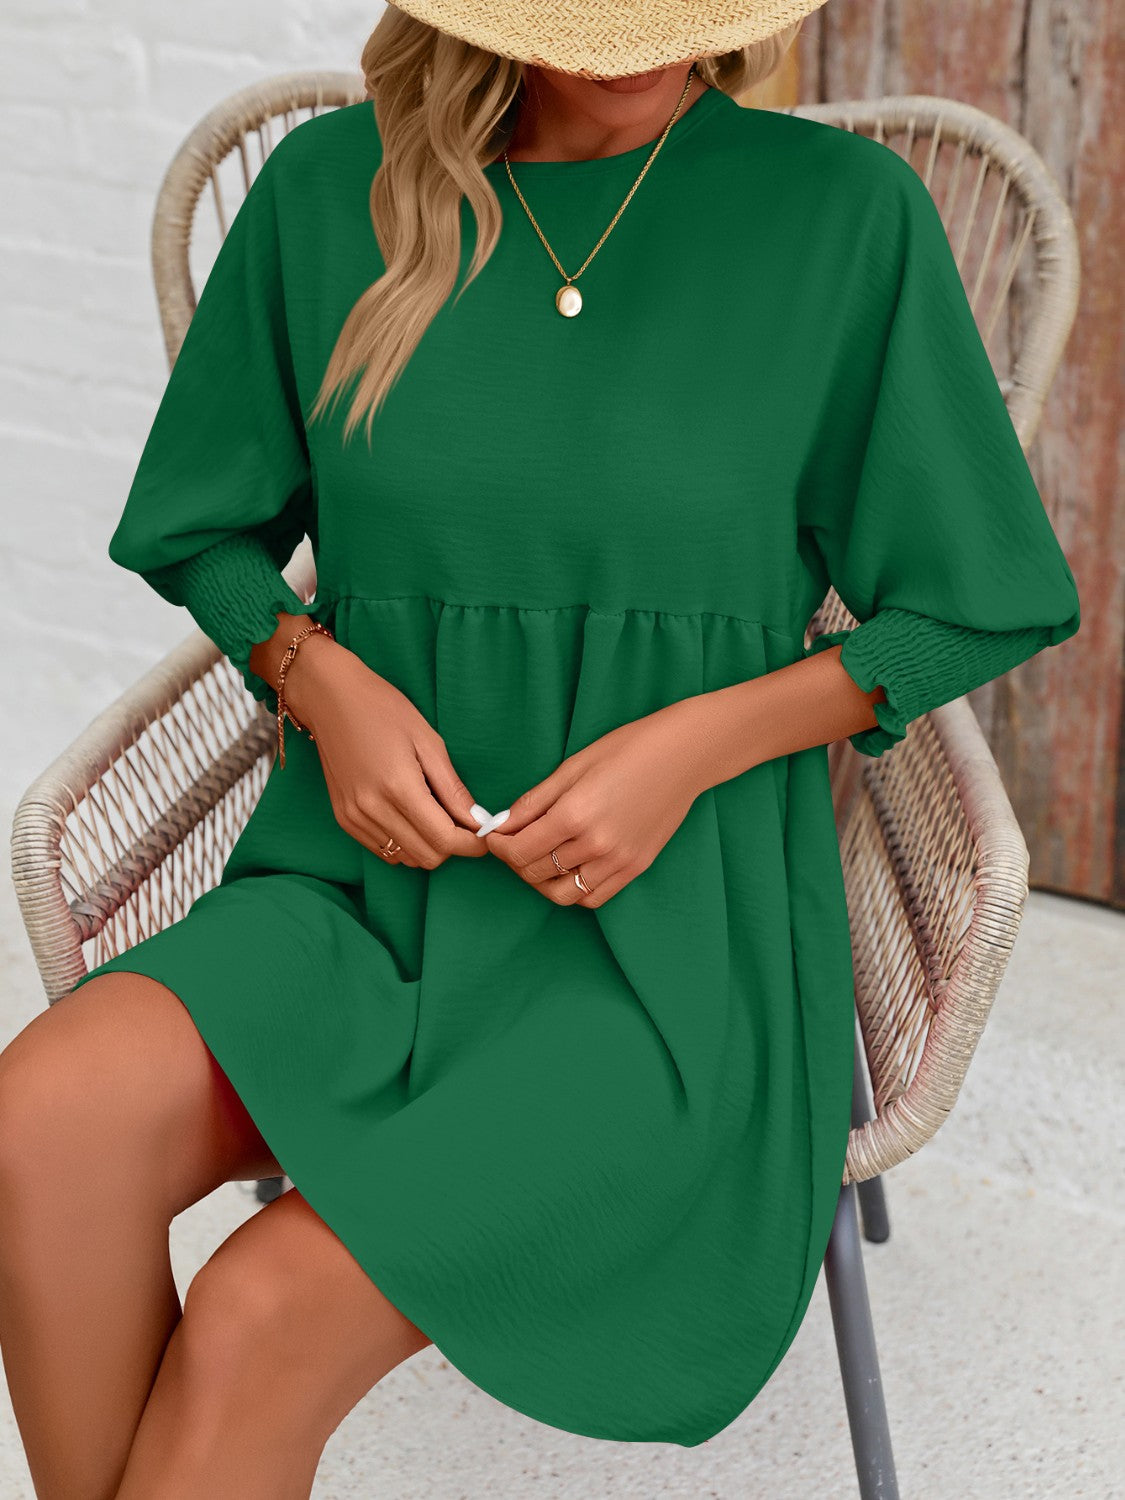 Chic Round Neck Lantern Sleeve Mini Dress for a stylish look. Perfect for any occasion, easy to style, and comfortable all day long